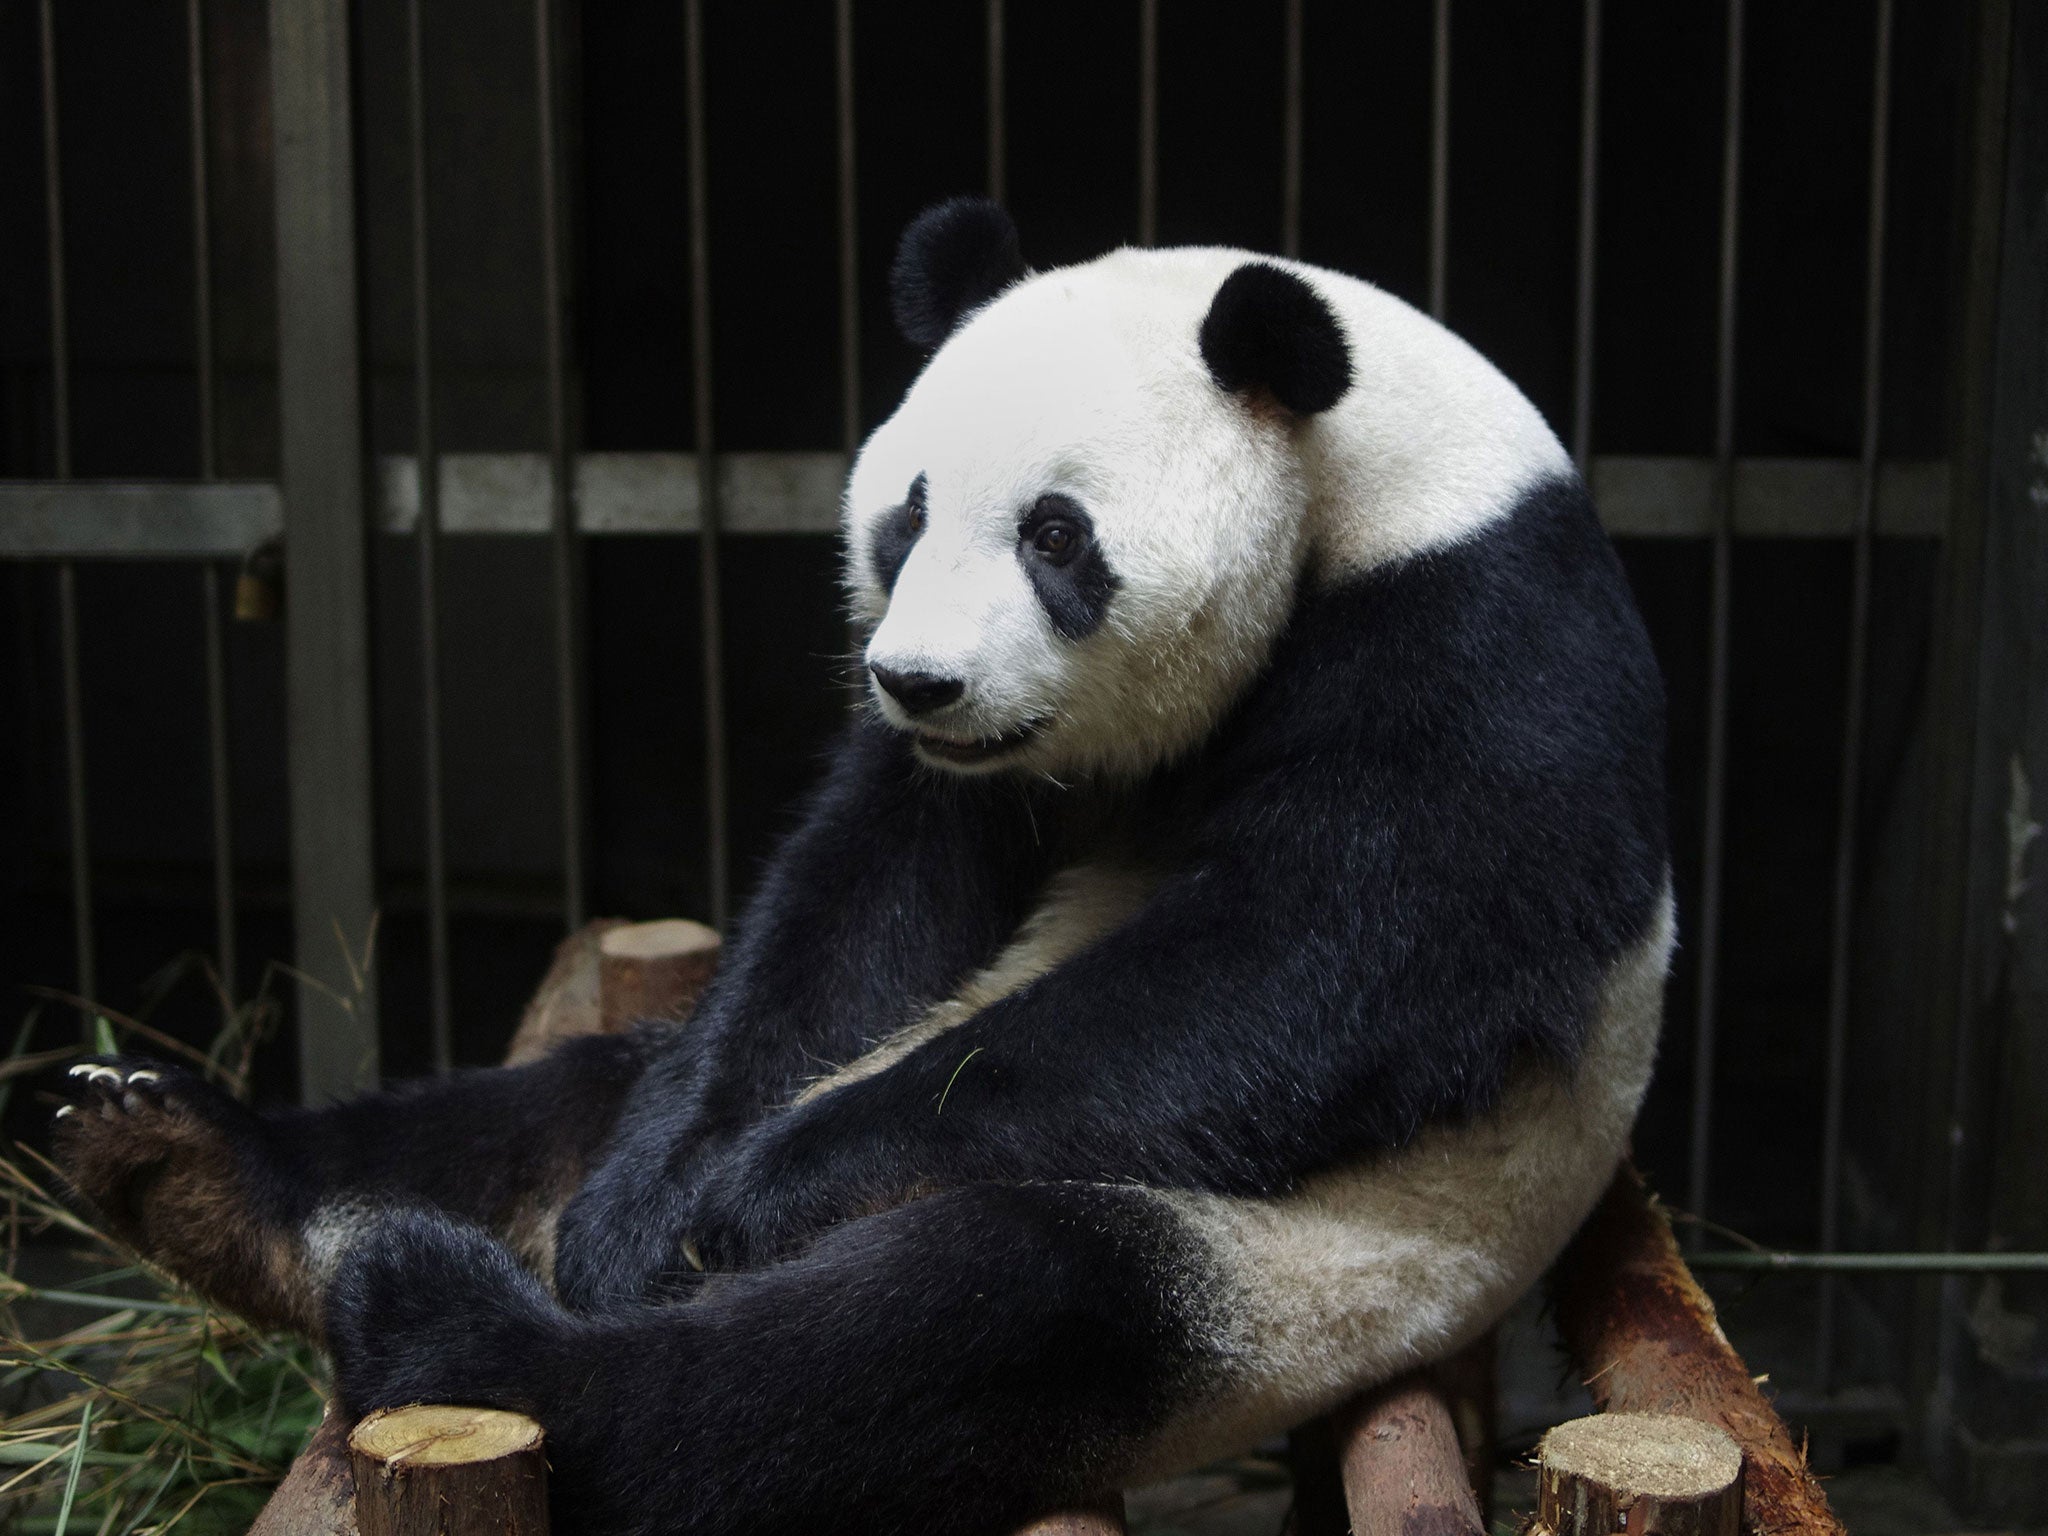 The giant panda who faked a pregnancy to get more food